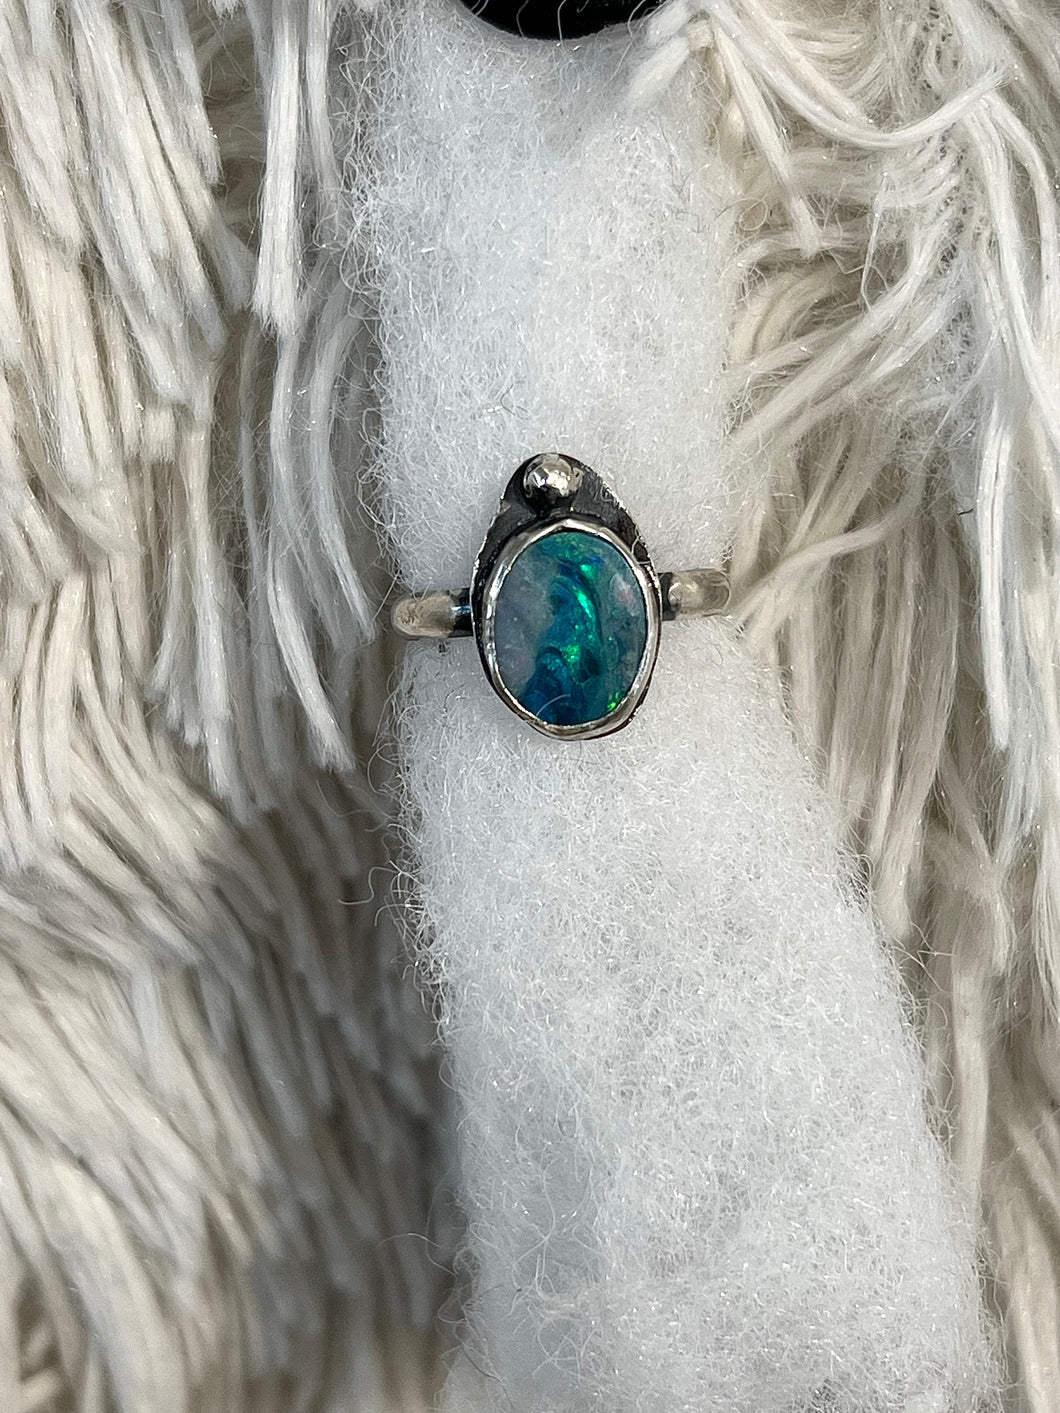 Opal ring size 8